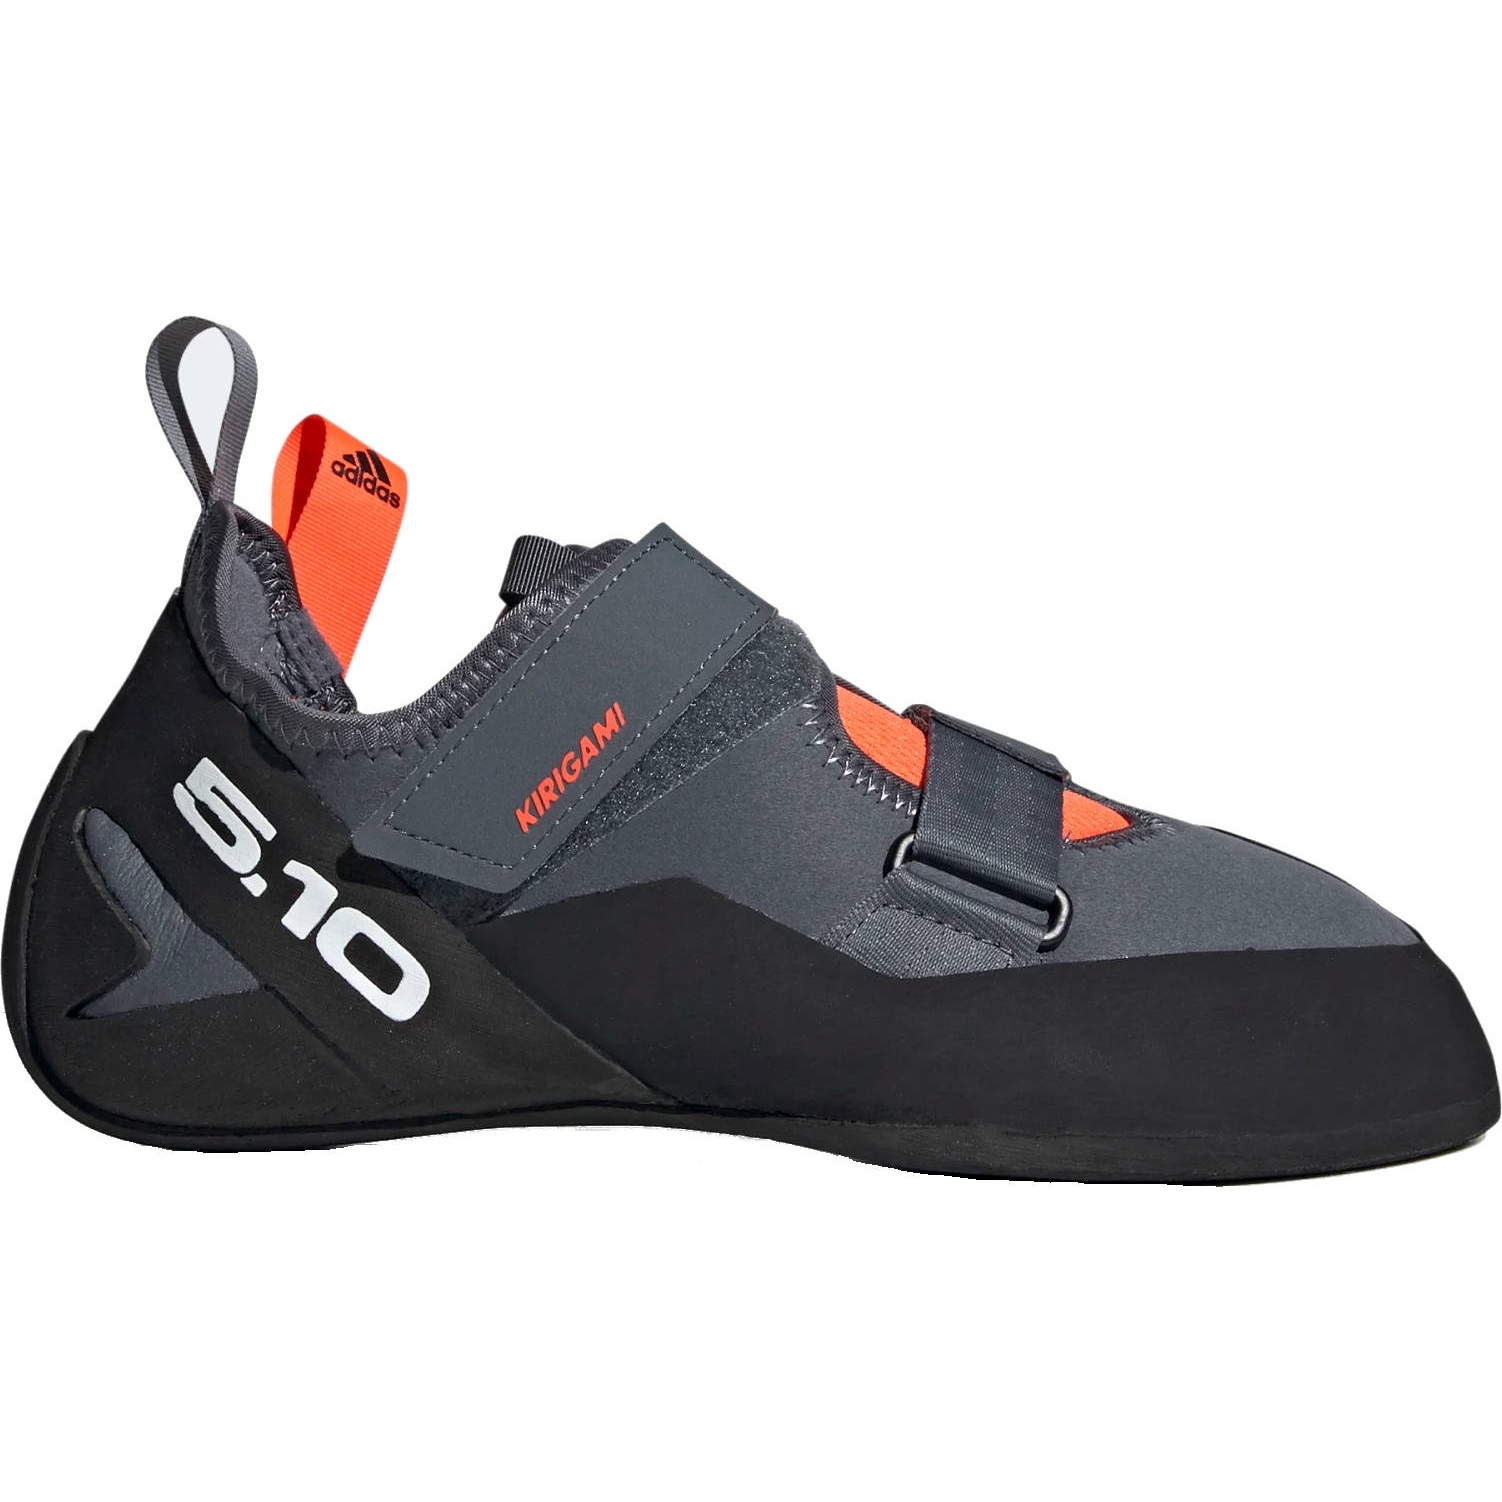 Picture of Five Ten Kirigami Climbing Shoes - Onix / Core Black / Solar Red